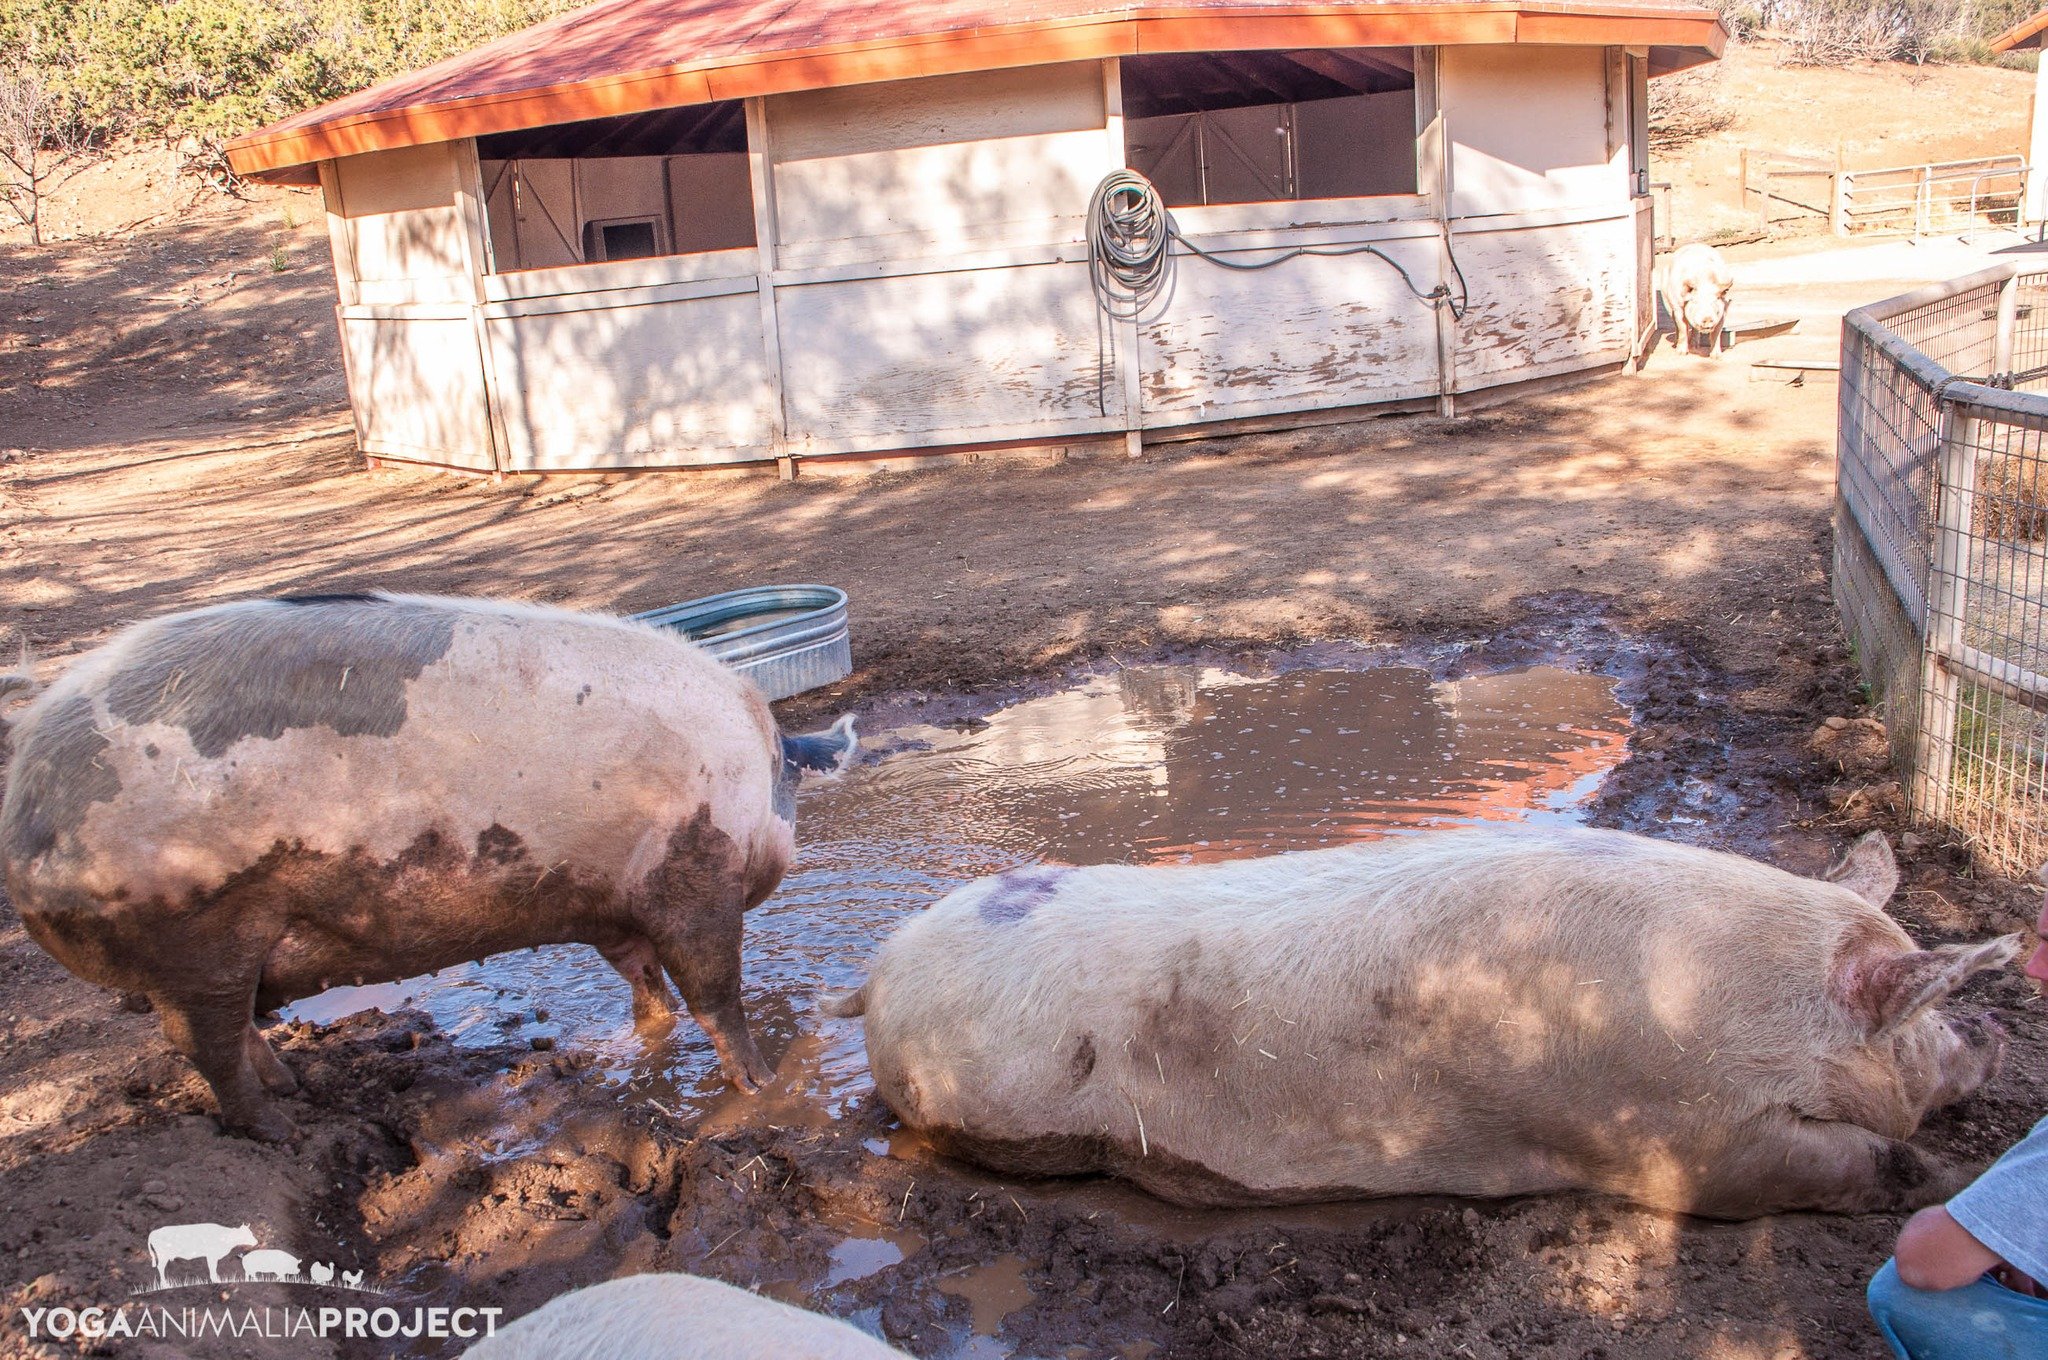 From the Archive: A few photos from my days working at Animal Acres. 

Photo 1 - June 19, 2011 Jorja &amp; Bagel pigs mud bathing near the event gazebo. The event gazebo was a central space where I started tours of the sanctuary with a video introduc